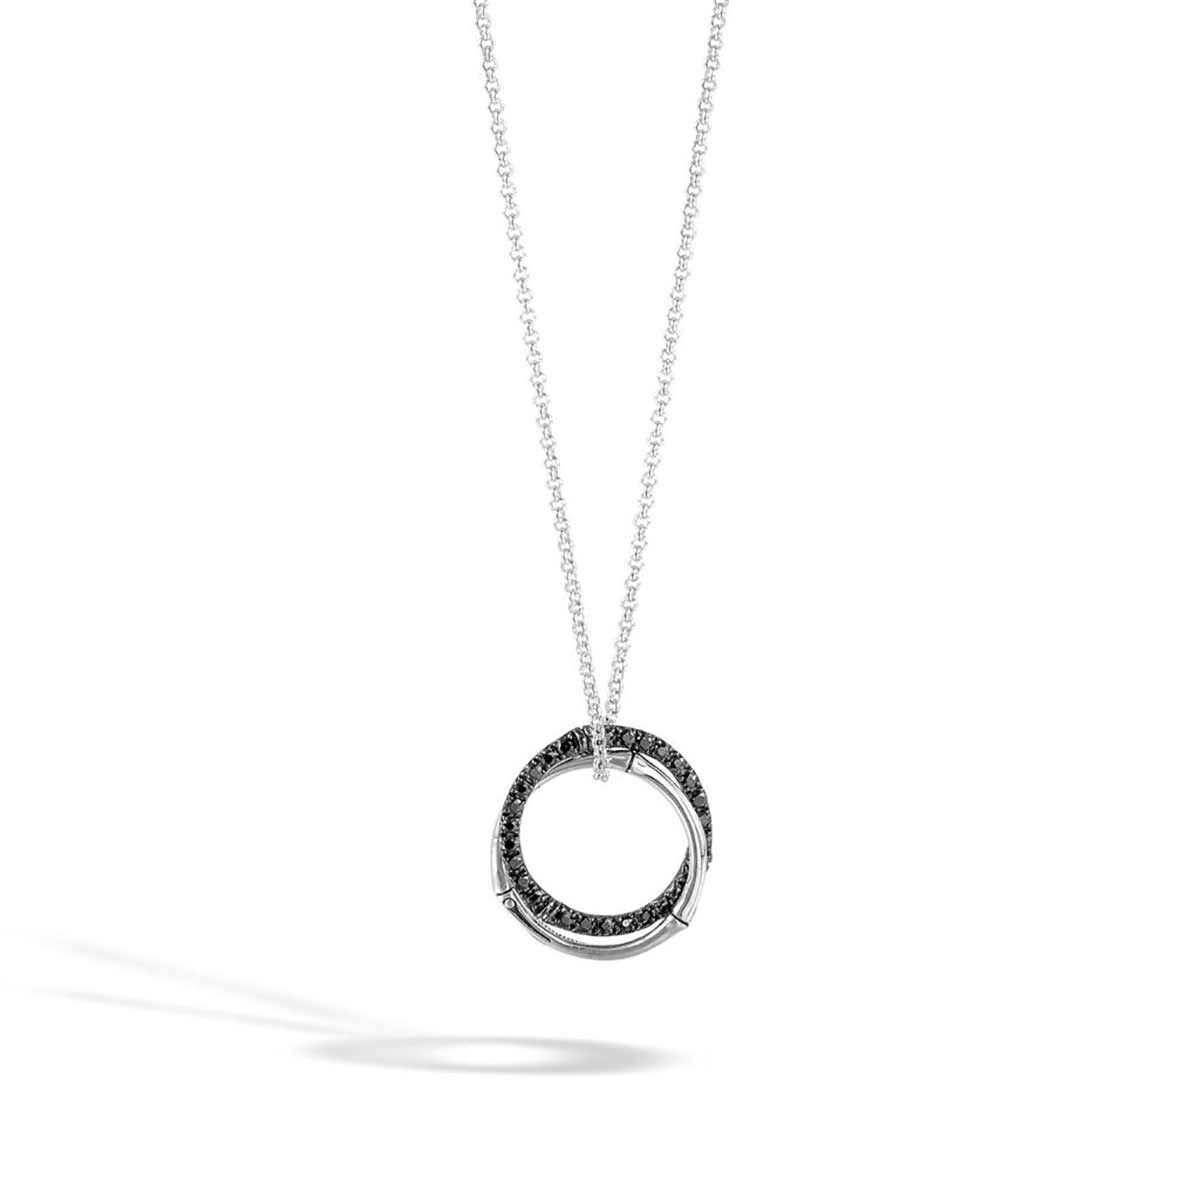 Bamboo Interlinking Pendant Necklace in Silver with Gemstone